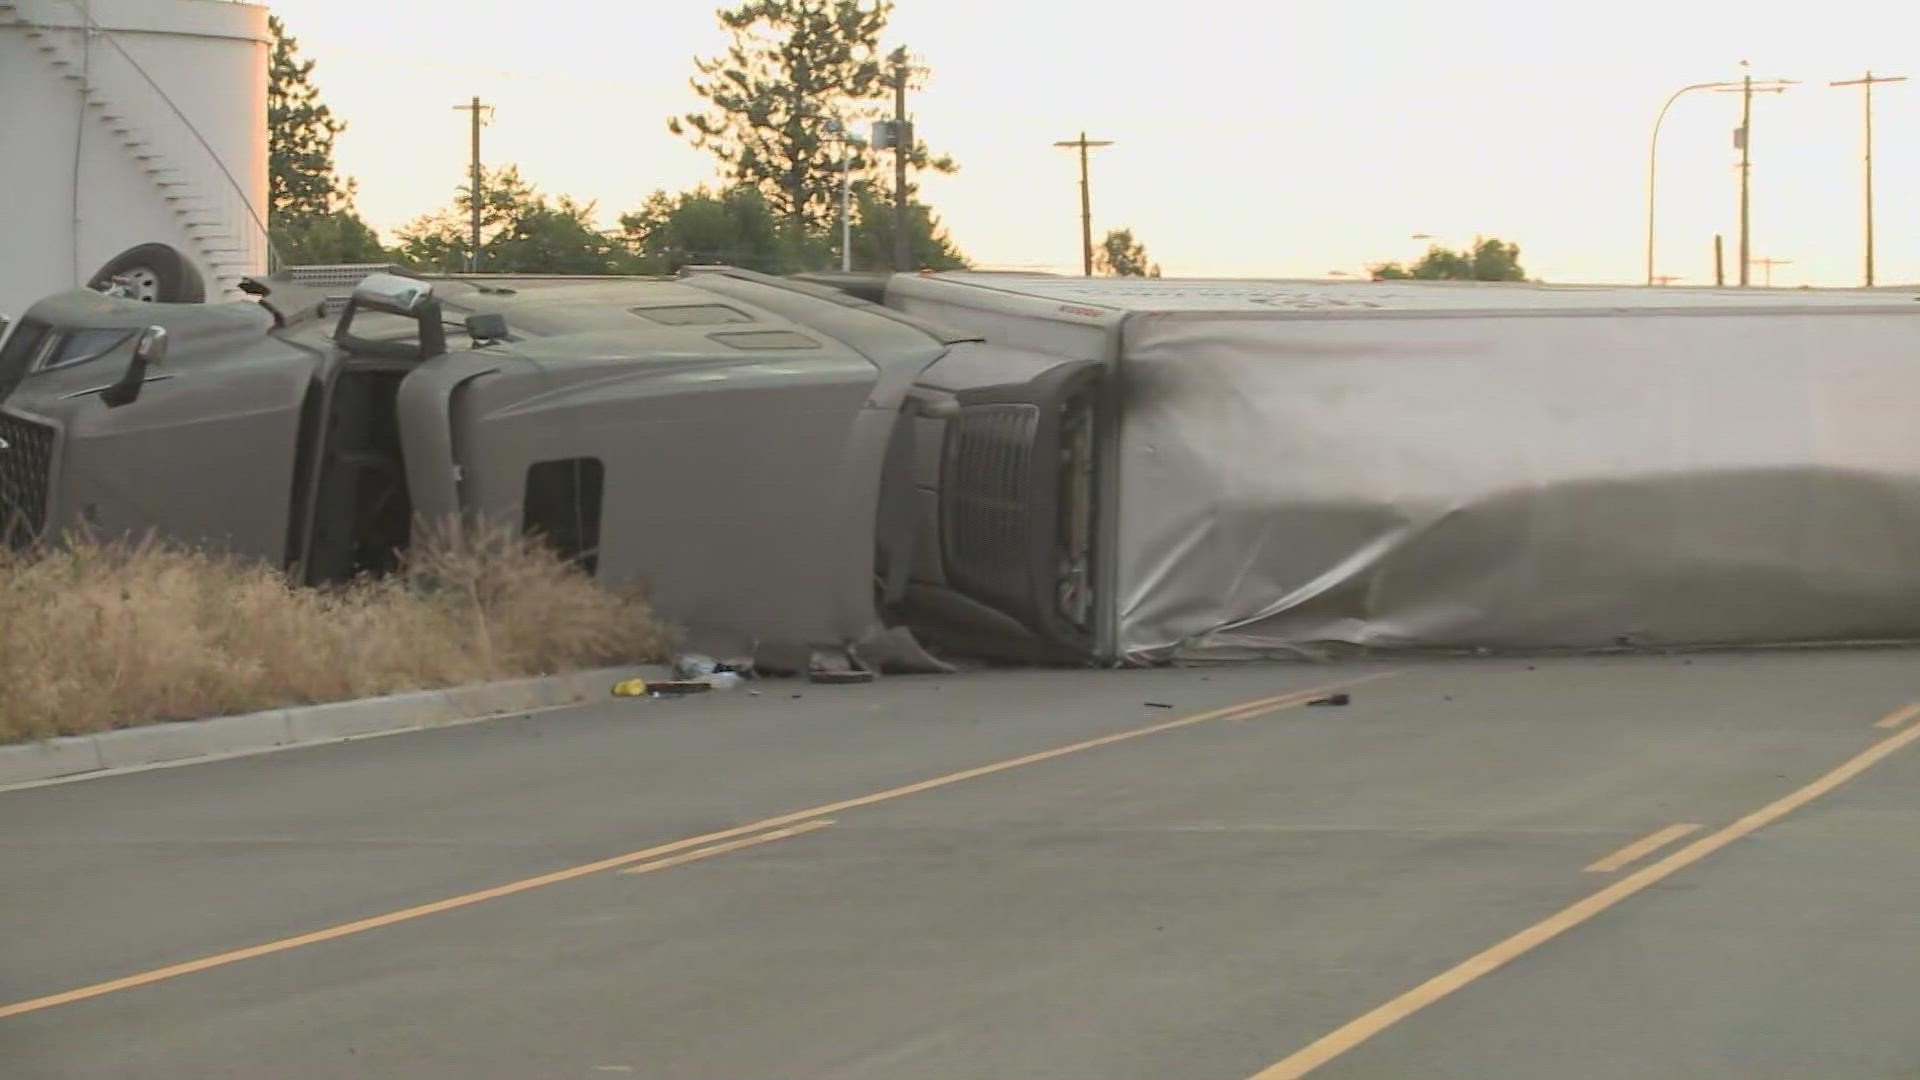 WSP says the driver swerved in front of the semi-truck, causing it to roll off the interstate.